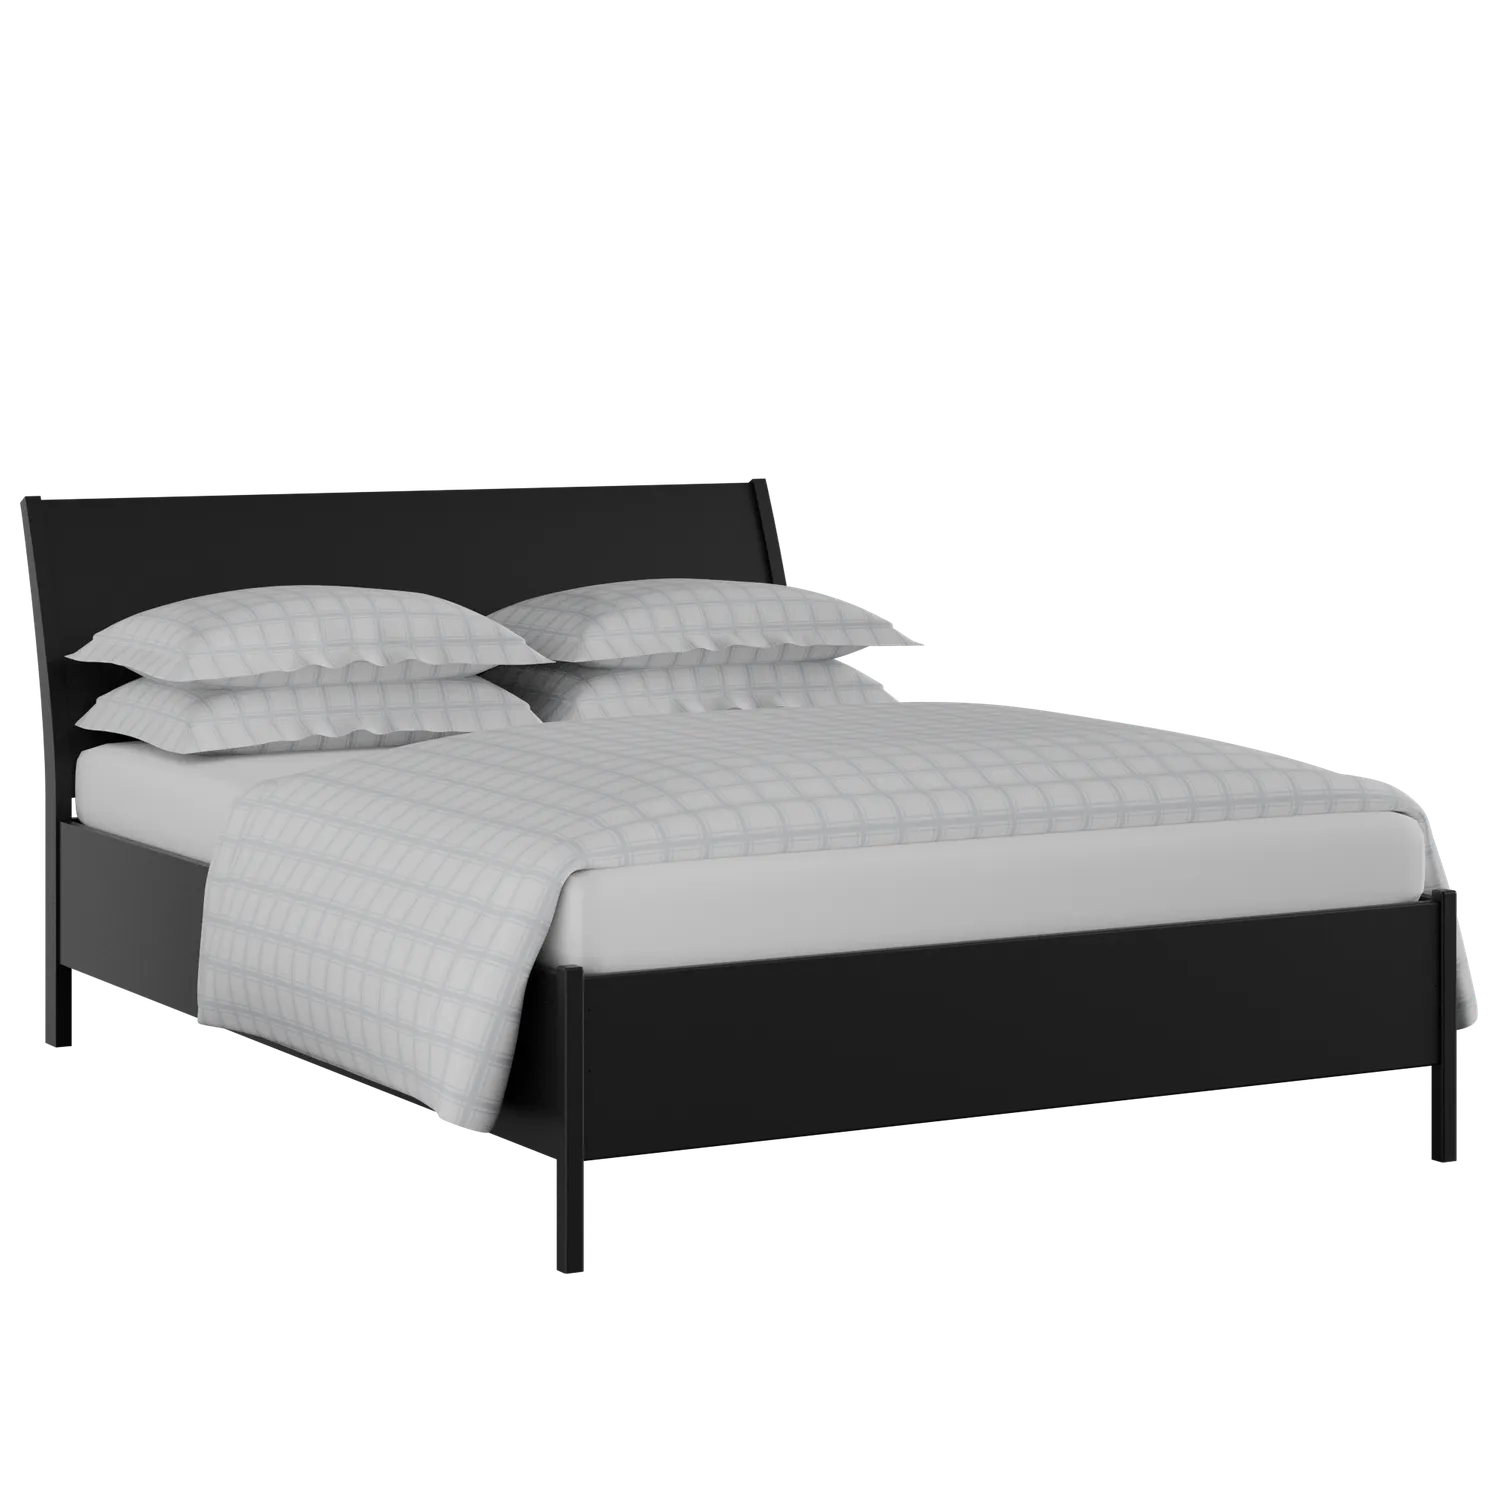 Hunt Painted painted wood bed in black with Juno mattress